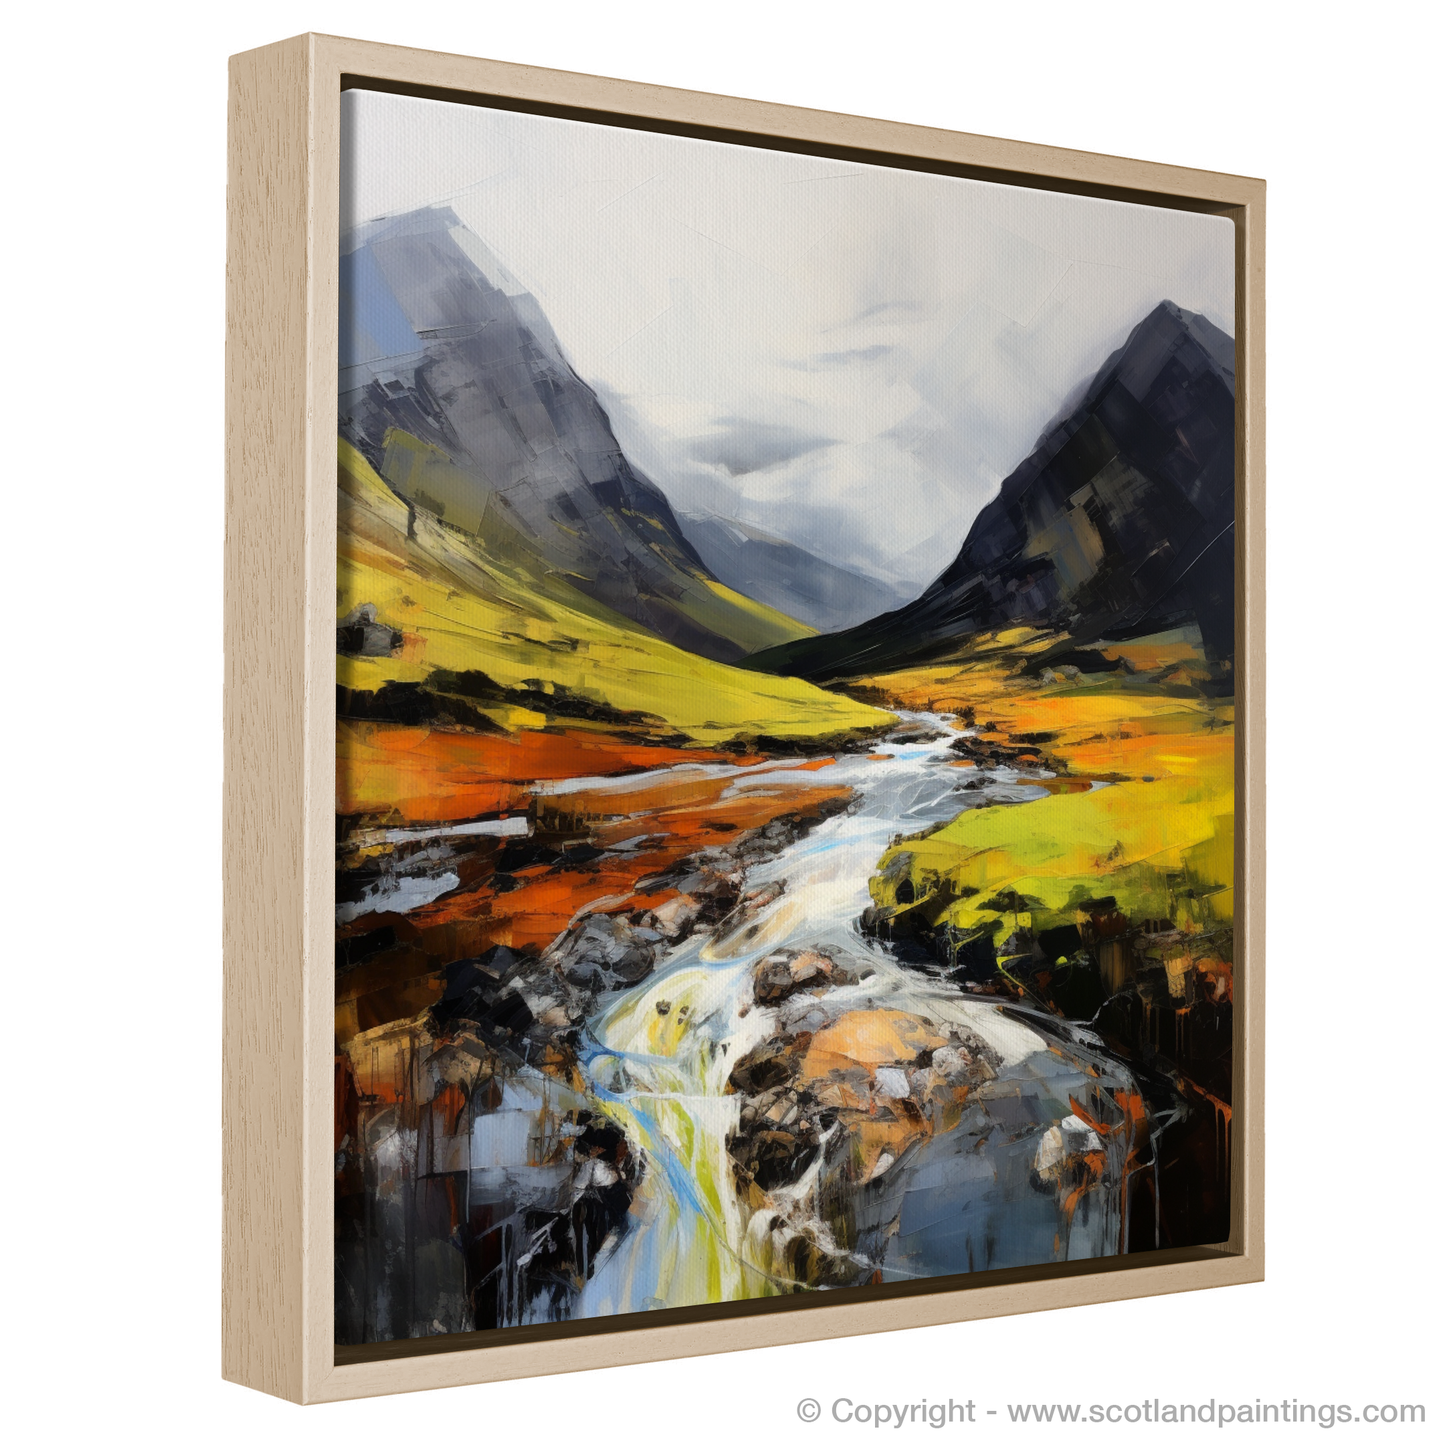 Painting and Art Print of Glen Coe, Highlands entitled "Wild Essence of Glen Coe".